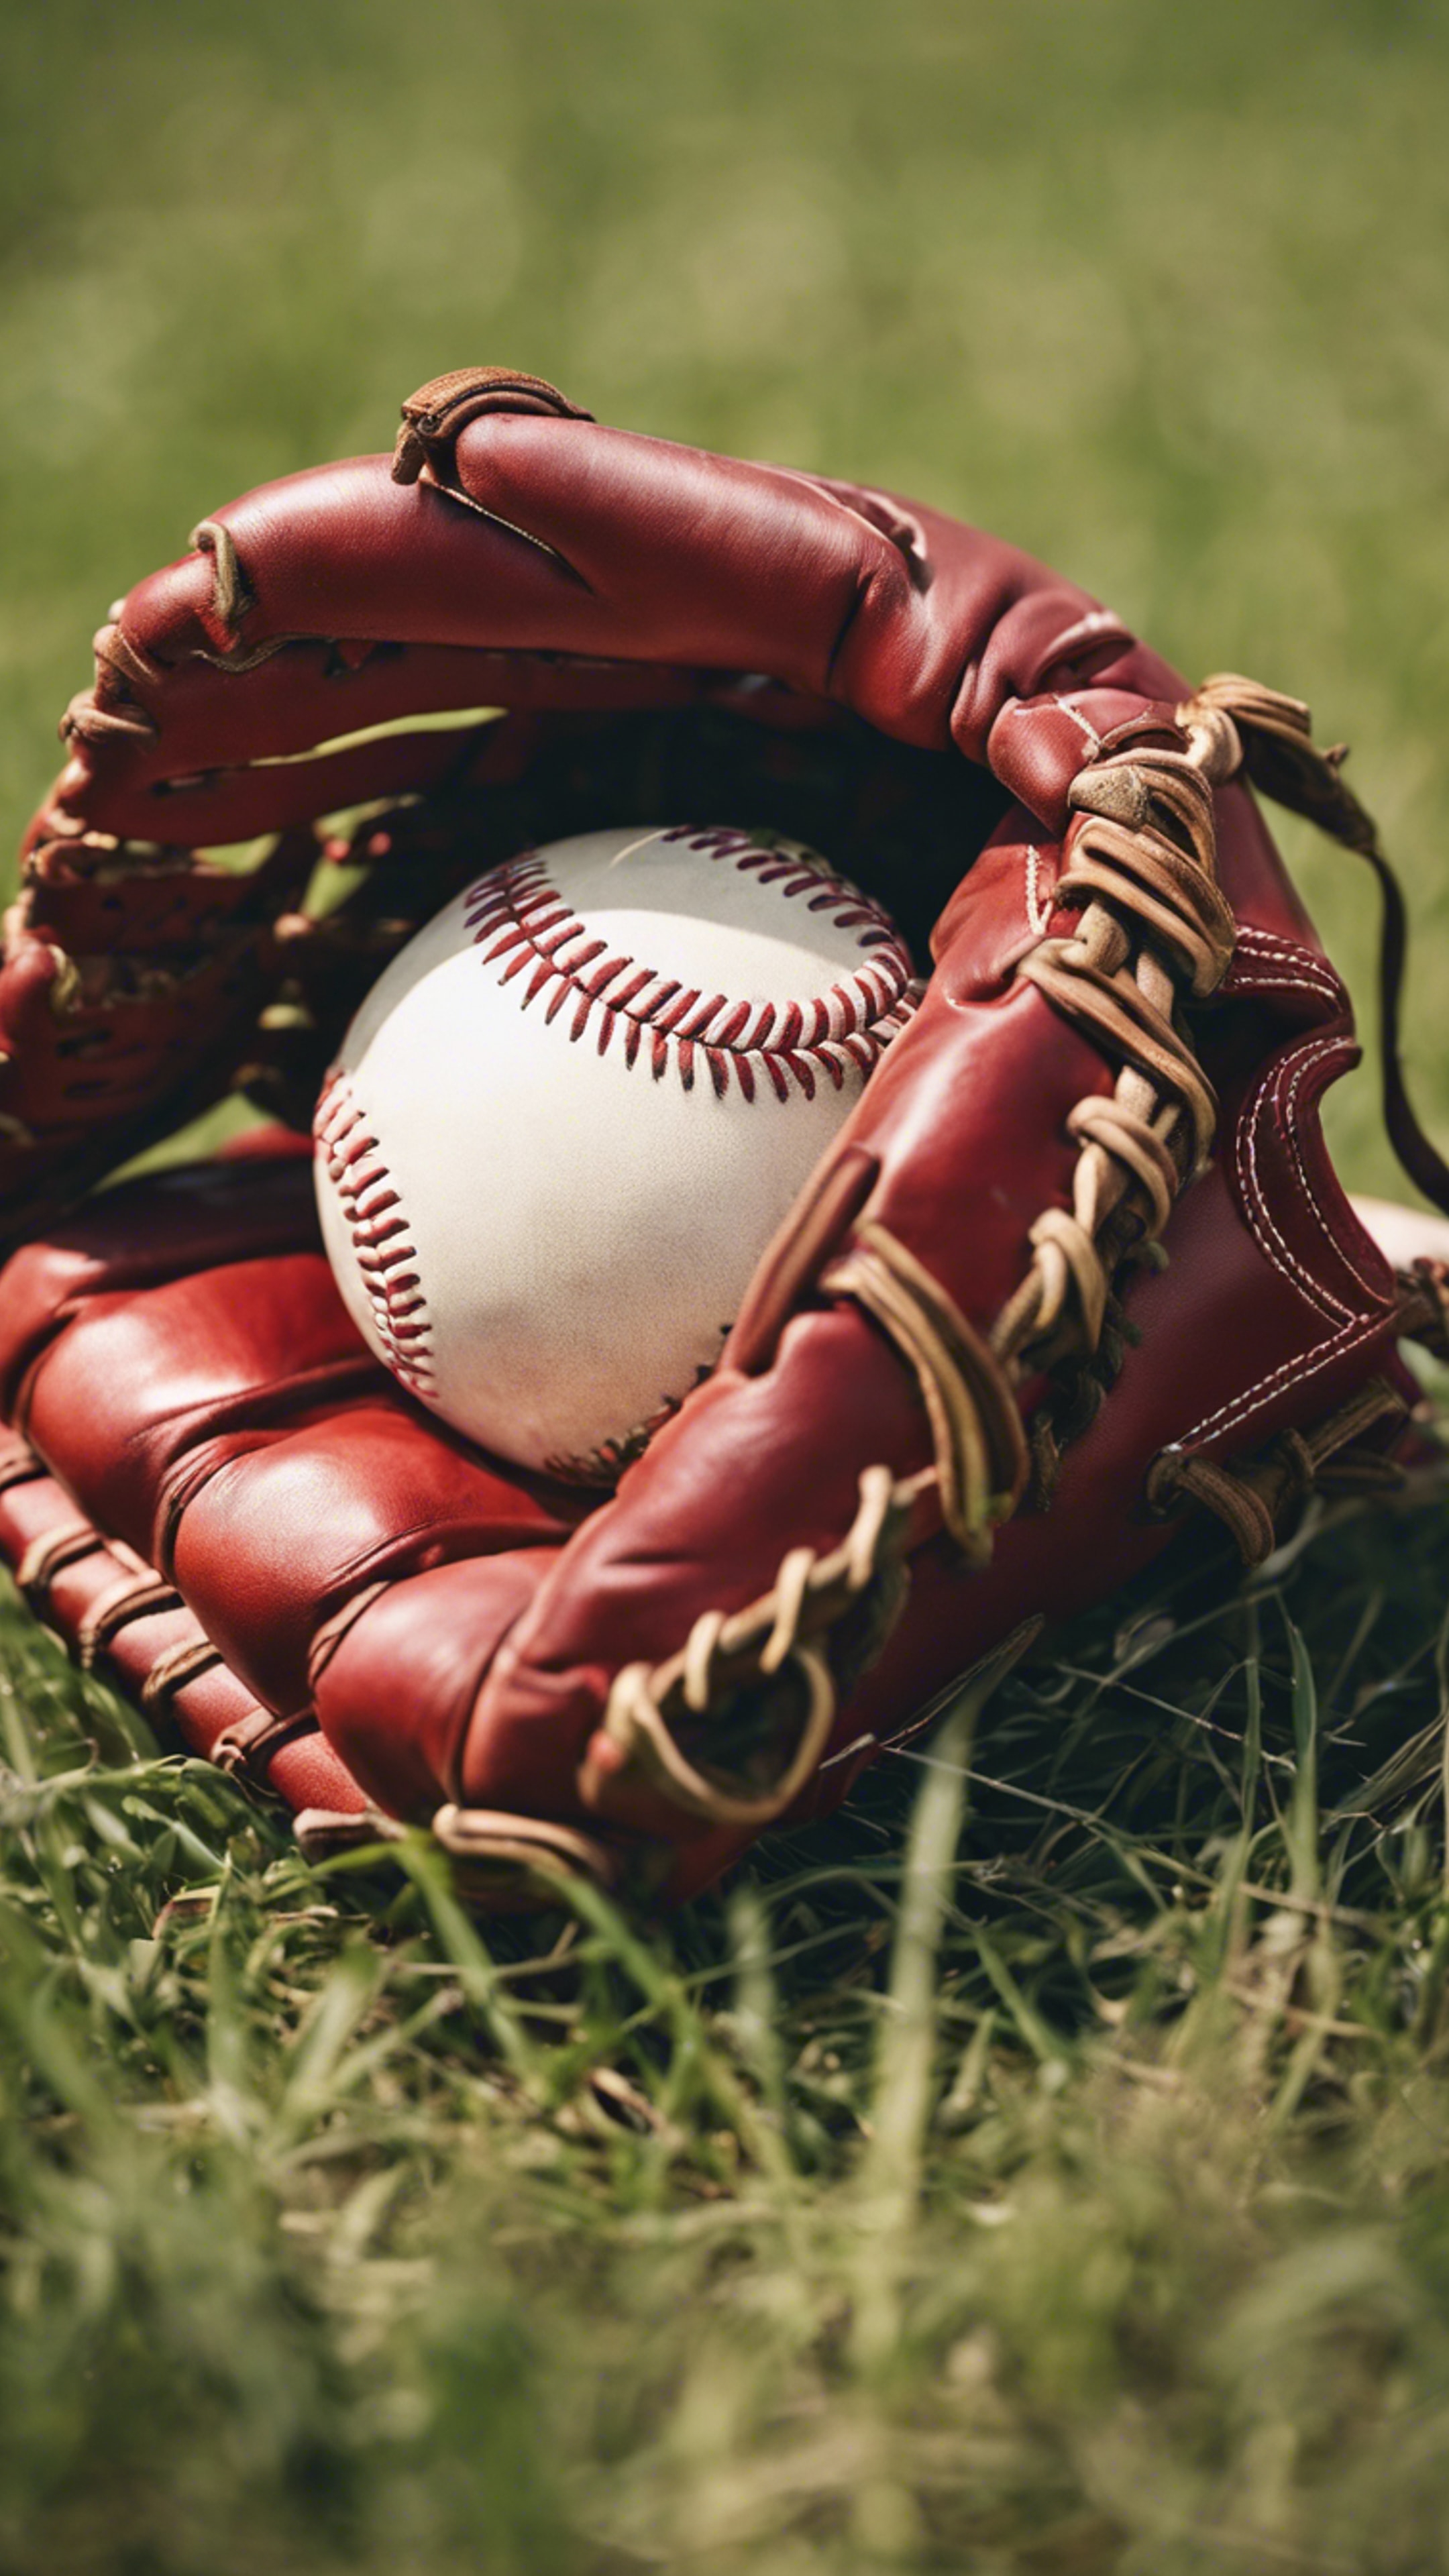 A striking red leather baseball glove on a grassy field right after a game. 墙纸[10102f7c198241d6b5bd]